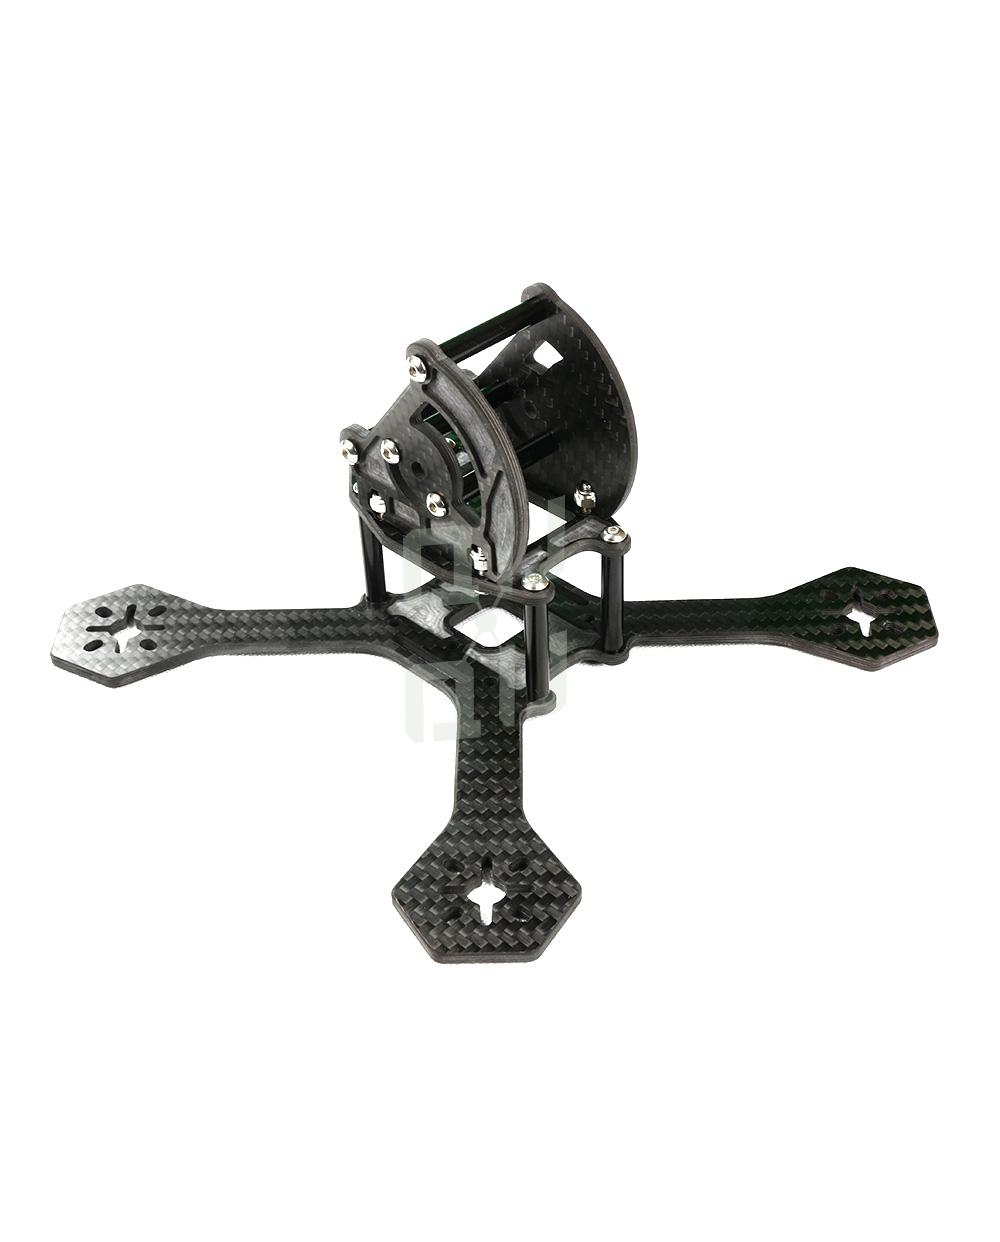 QQ166 4" Racing Drone X-style frame available from QuadQuestions.com